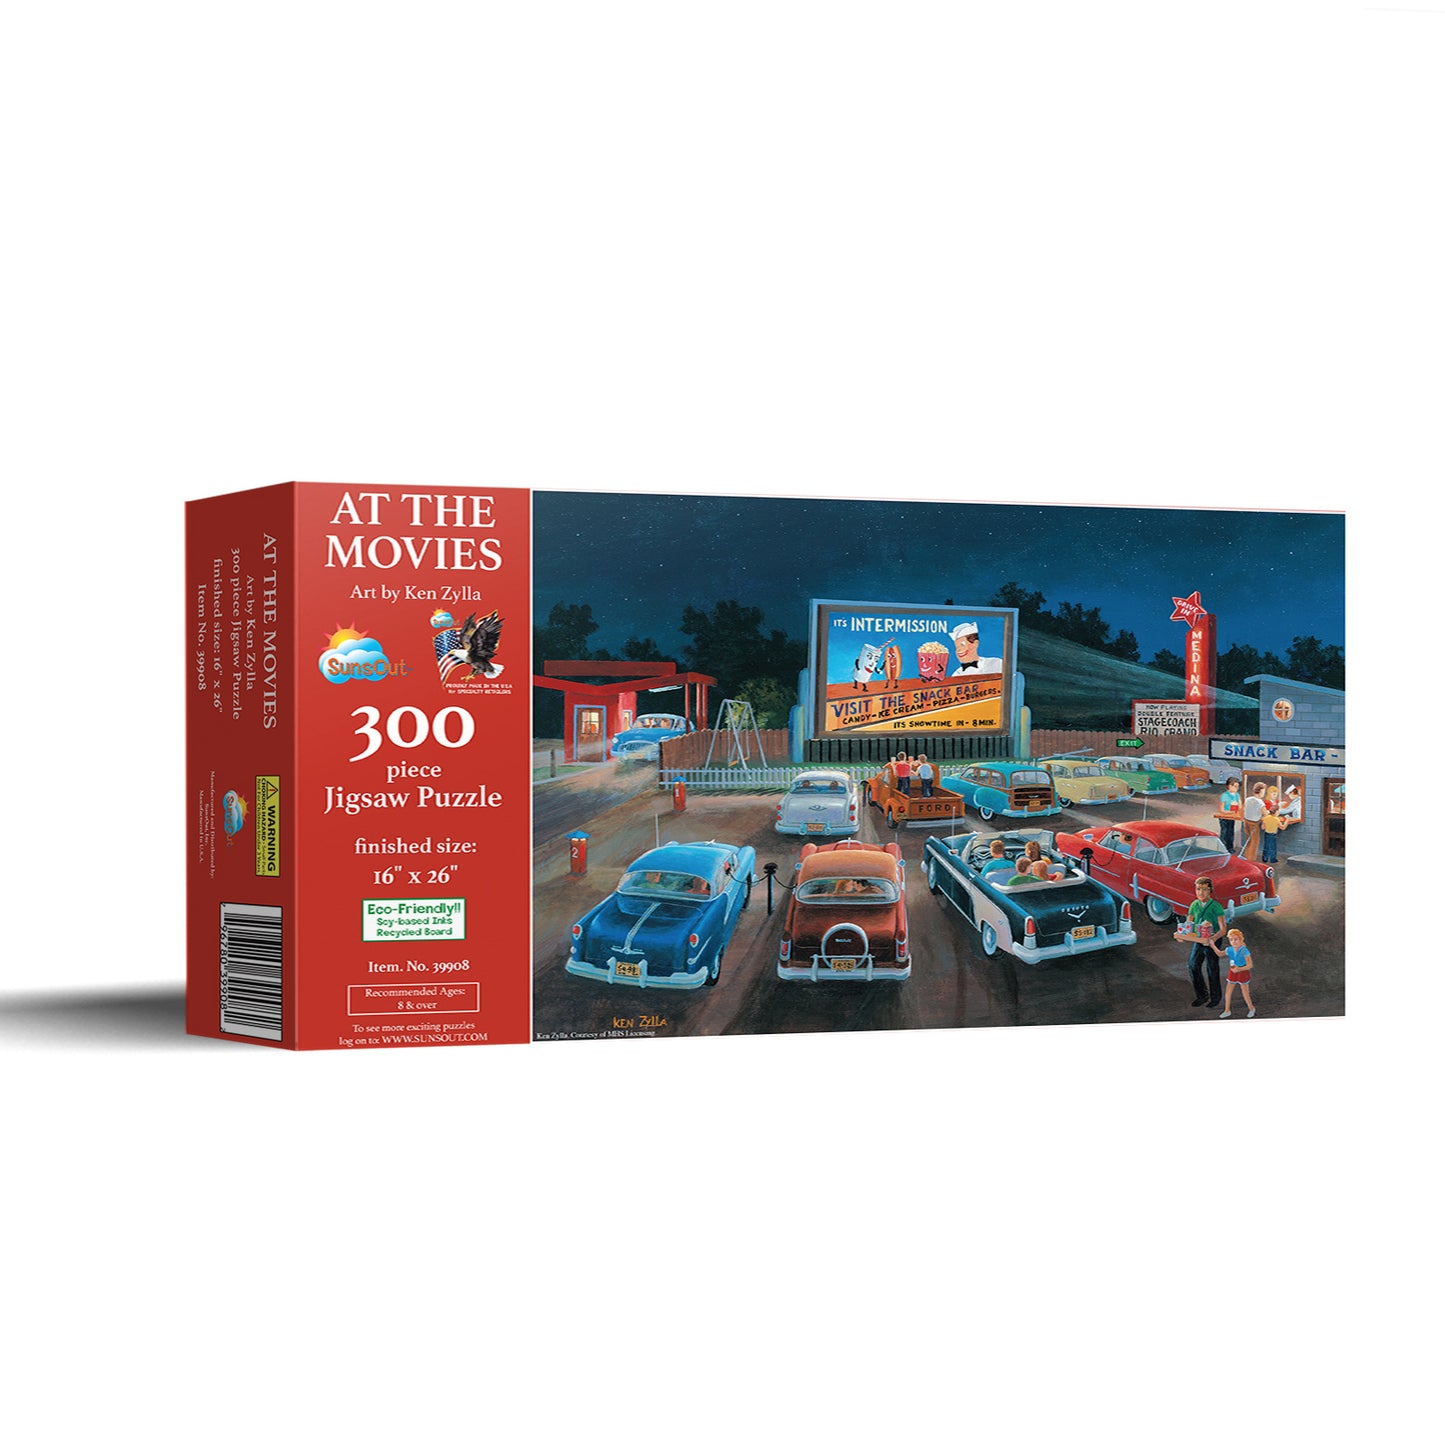 At the Movies 300 - 300 Piece Jigsaw Puzzle